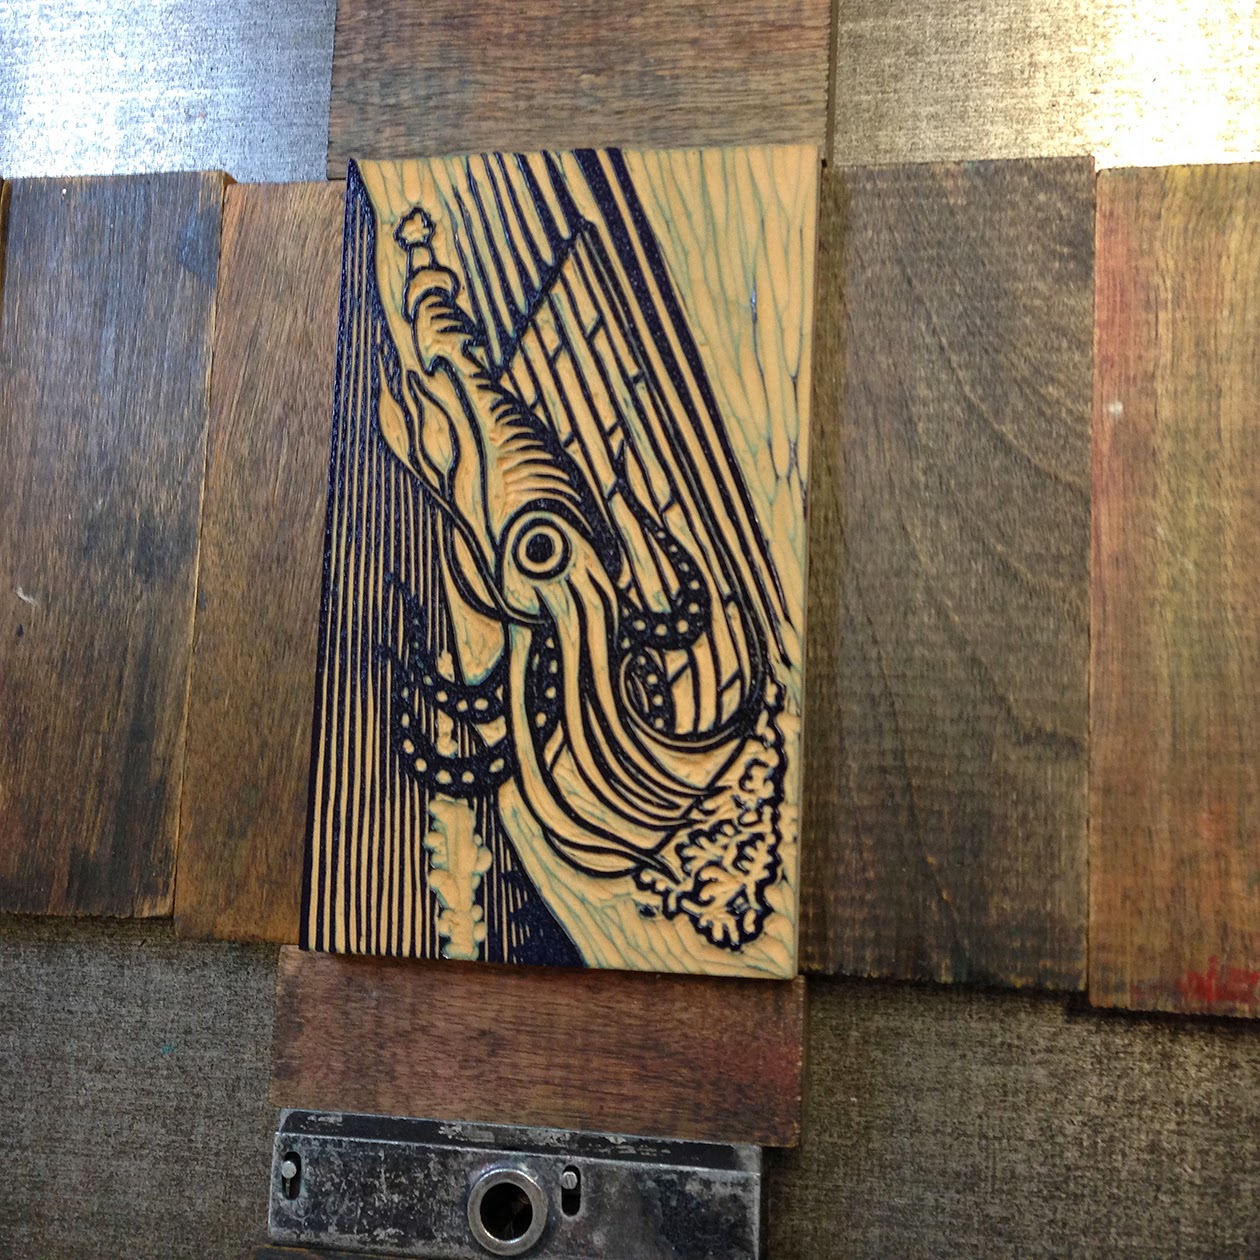 Preservation Services at Dartmouth College: The Making of a Multi-Color  Linoleum Block Squid